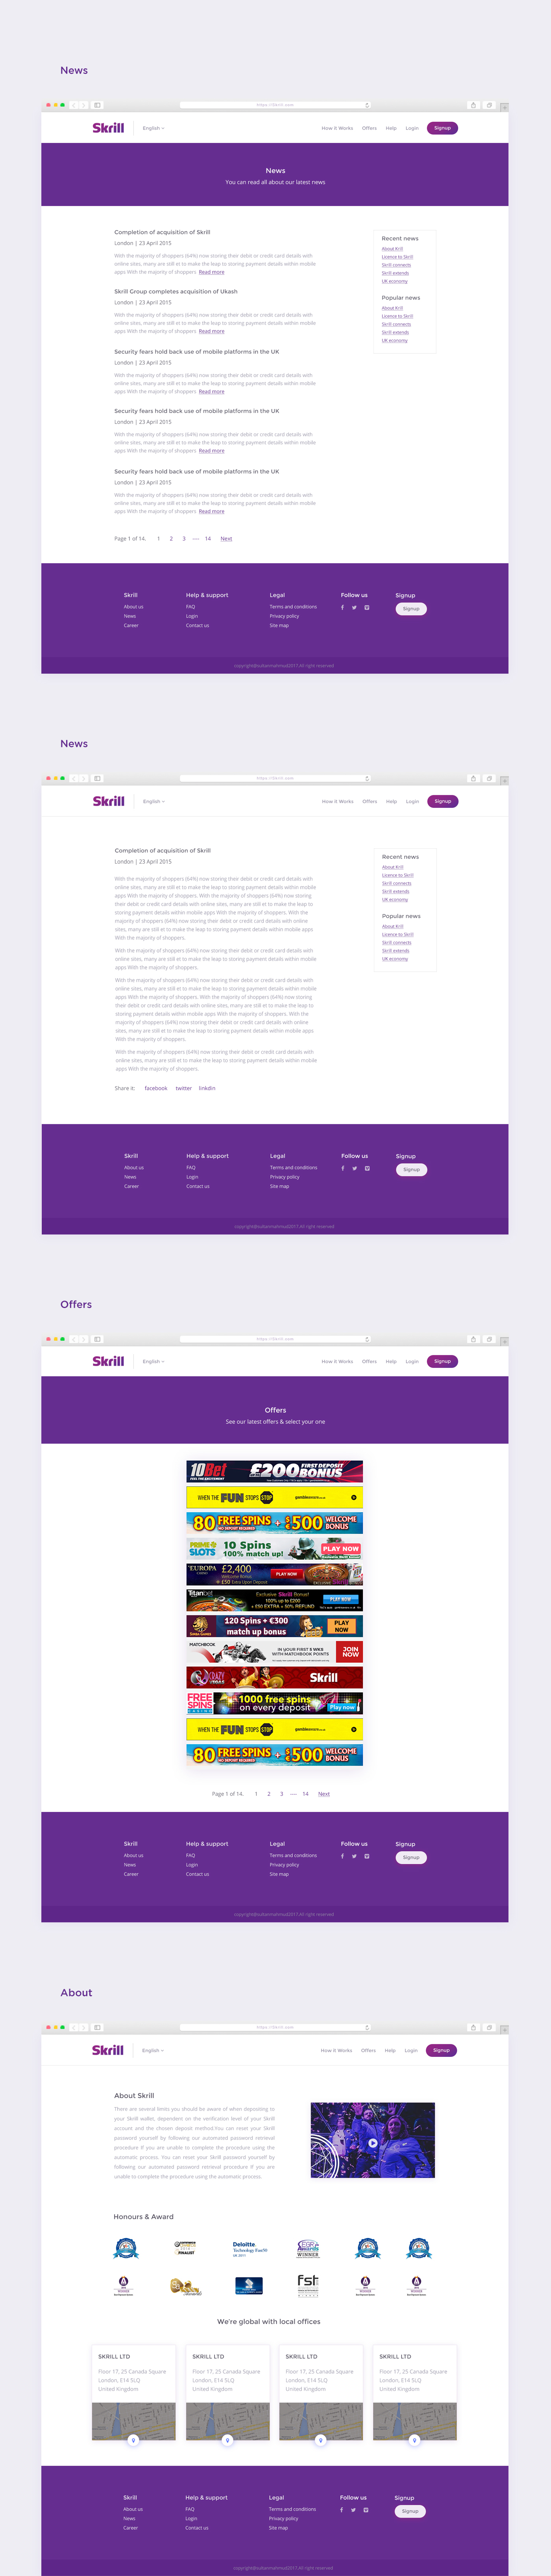 skrill redesign Responsive Mobileapps UI/UX concept Full Project Web Design  behance latest design featured